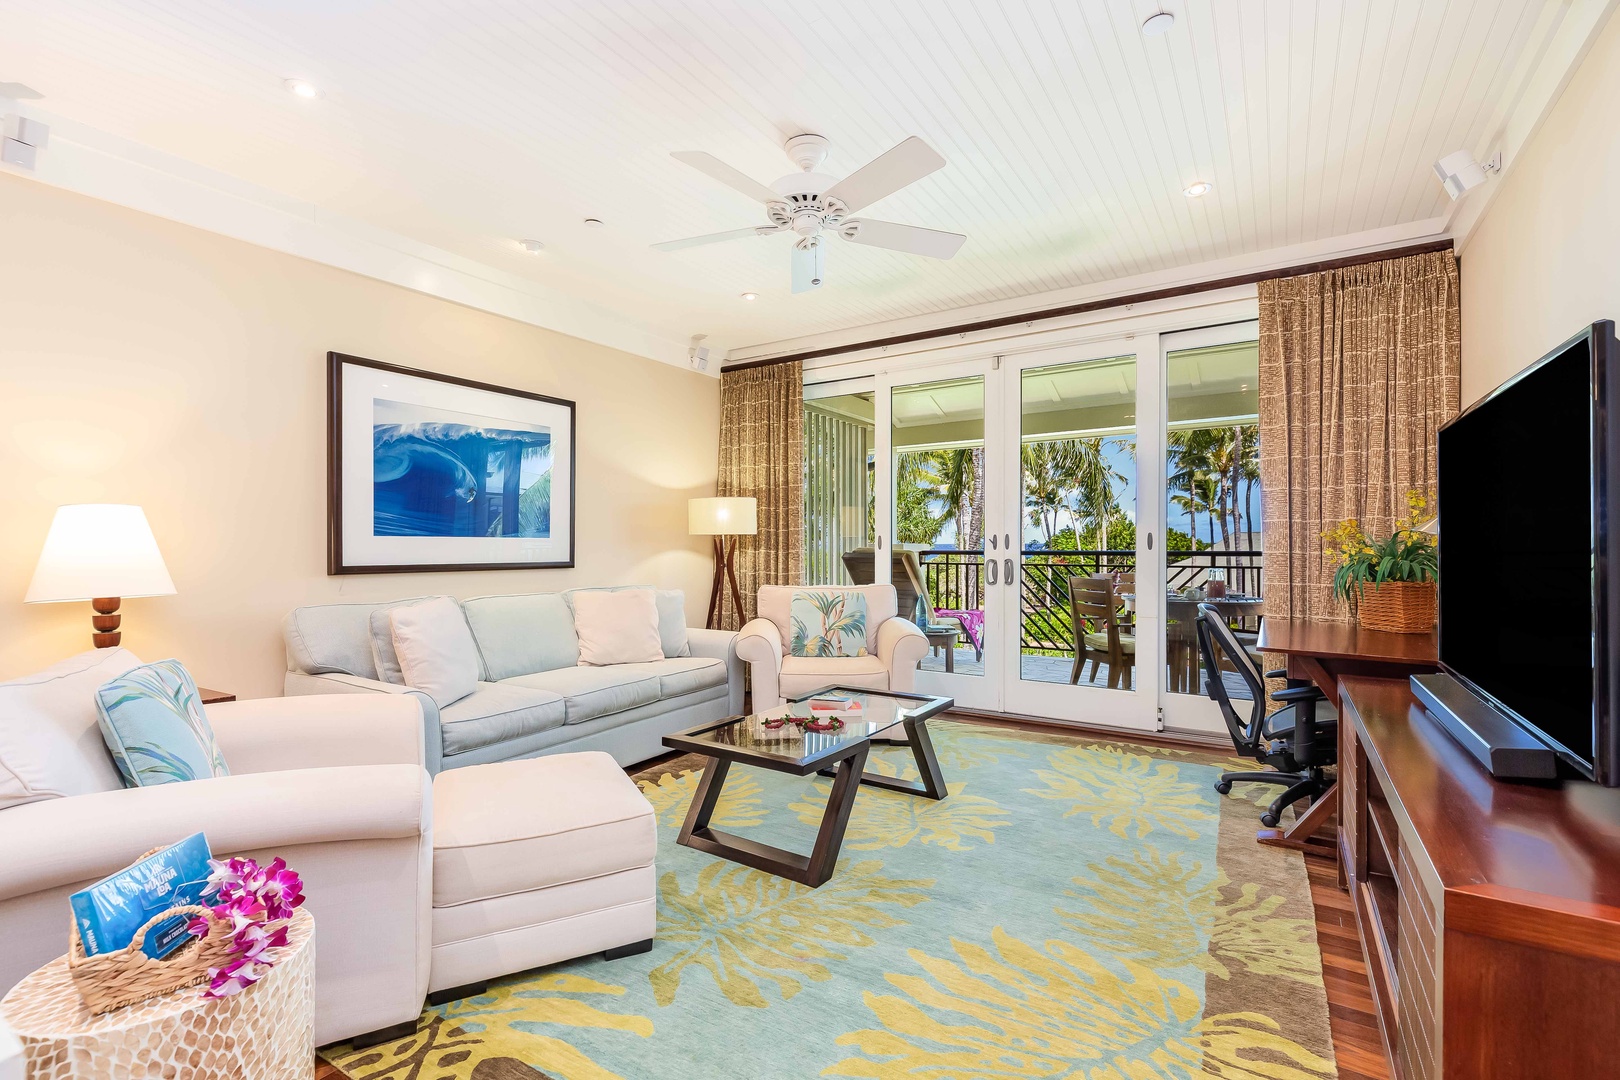 Kahuku Vacation Rentals, Turtle Bay Villas 308 - Open-concept living with direct access to lanai